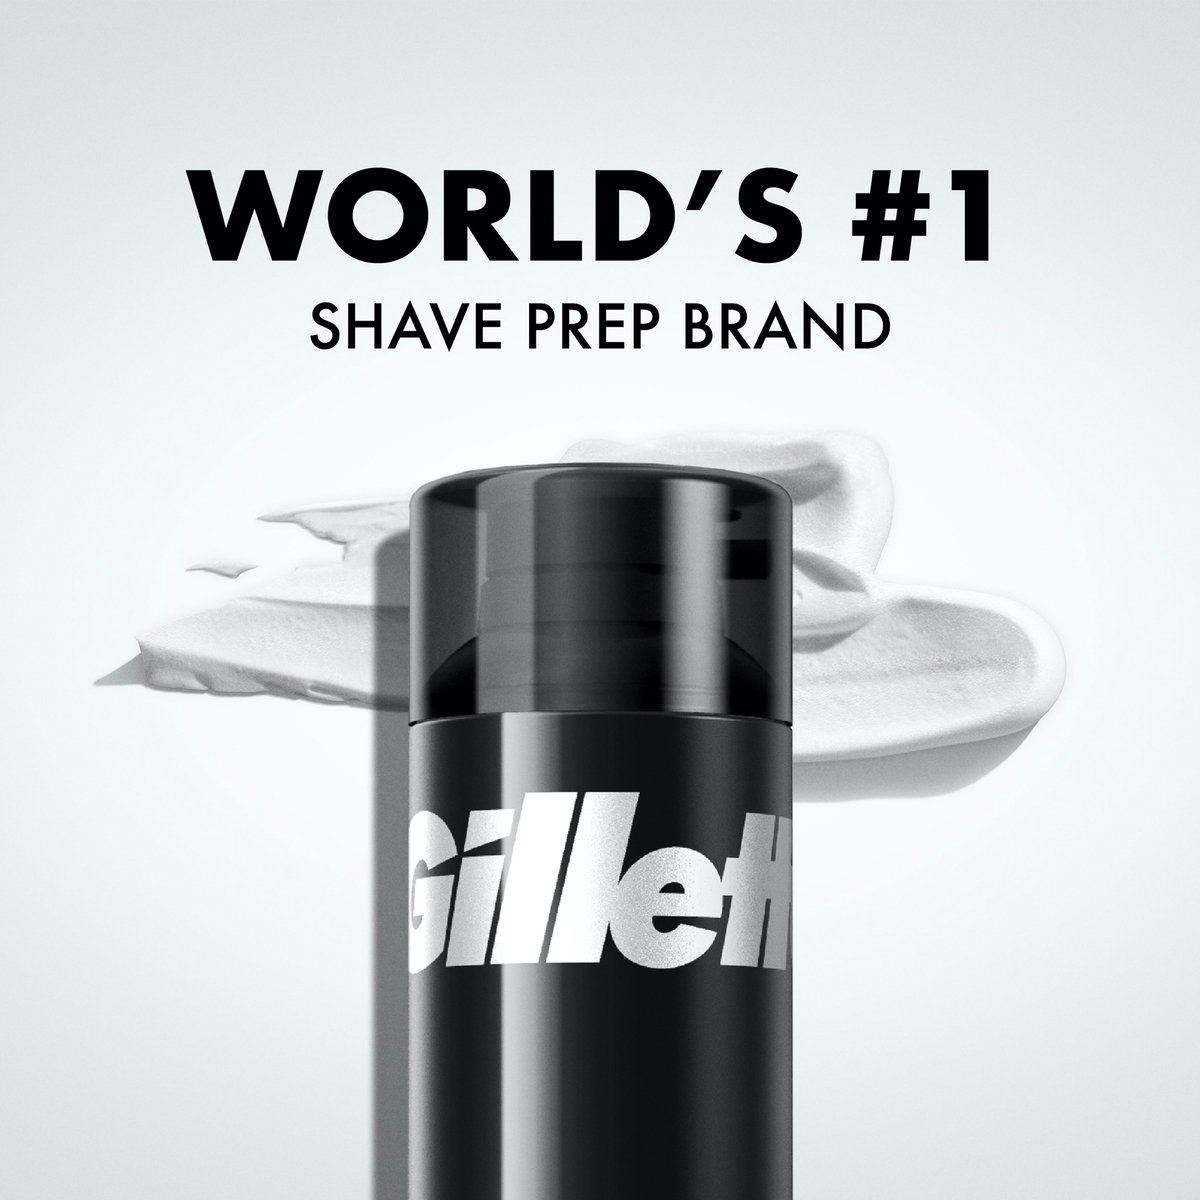 Gillette Pro Shave Foam Icy Cool Menthol 250 ml